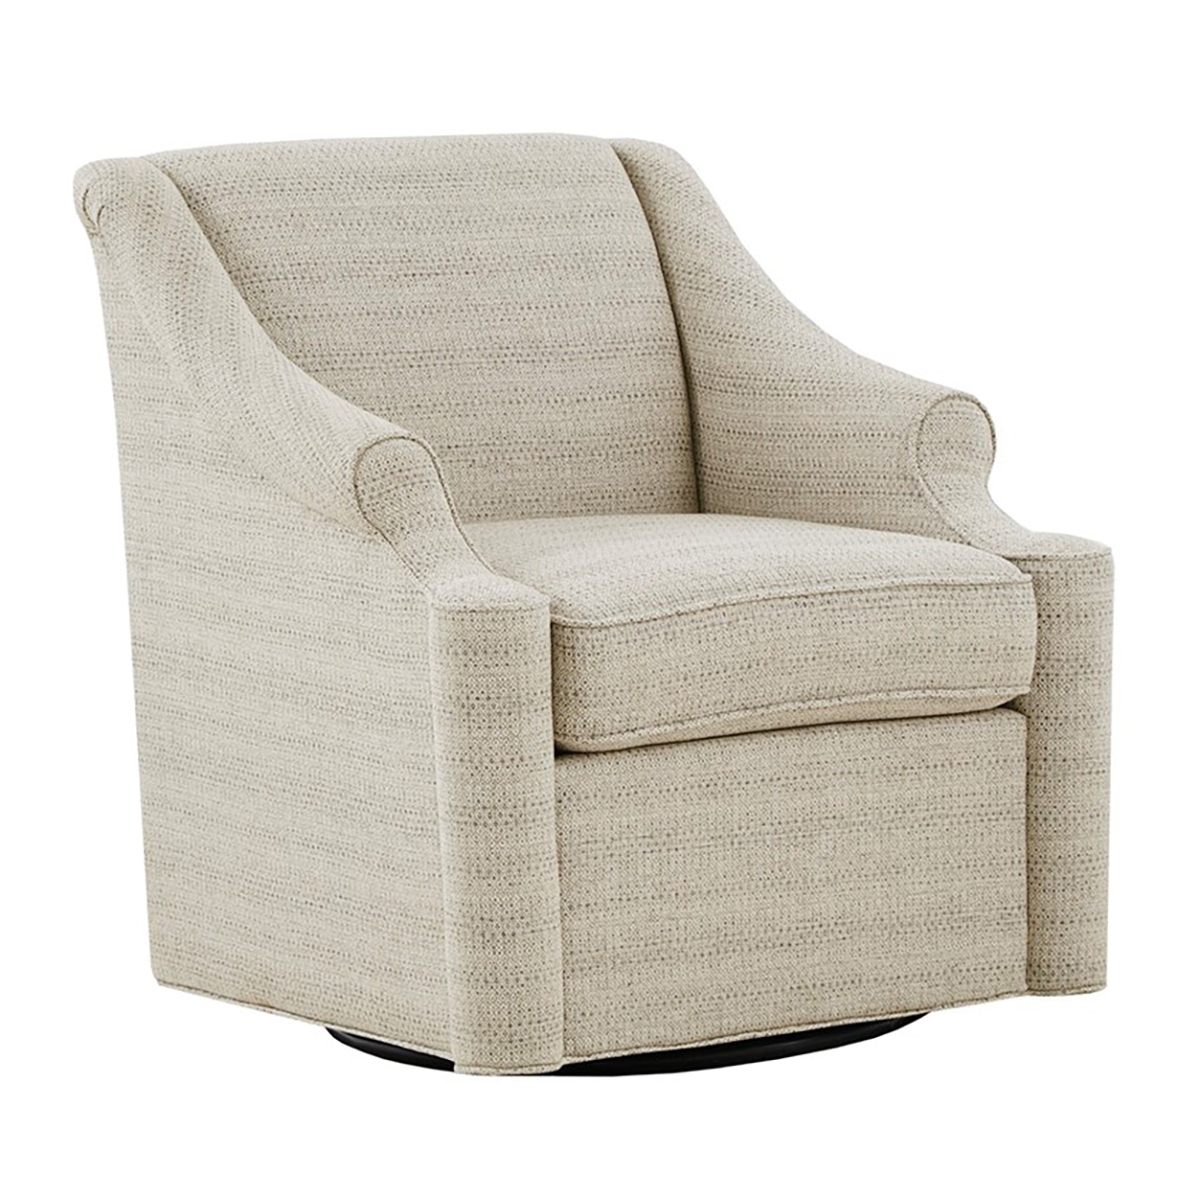 Picture of JUSTINE SWIVEL GLIDER CHAIR